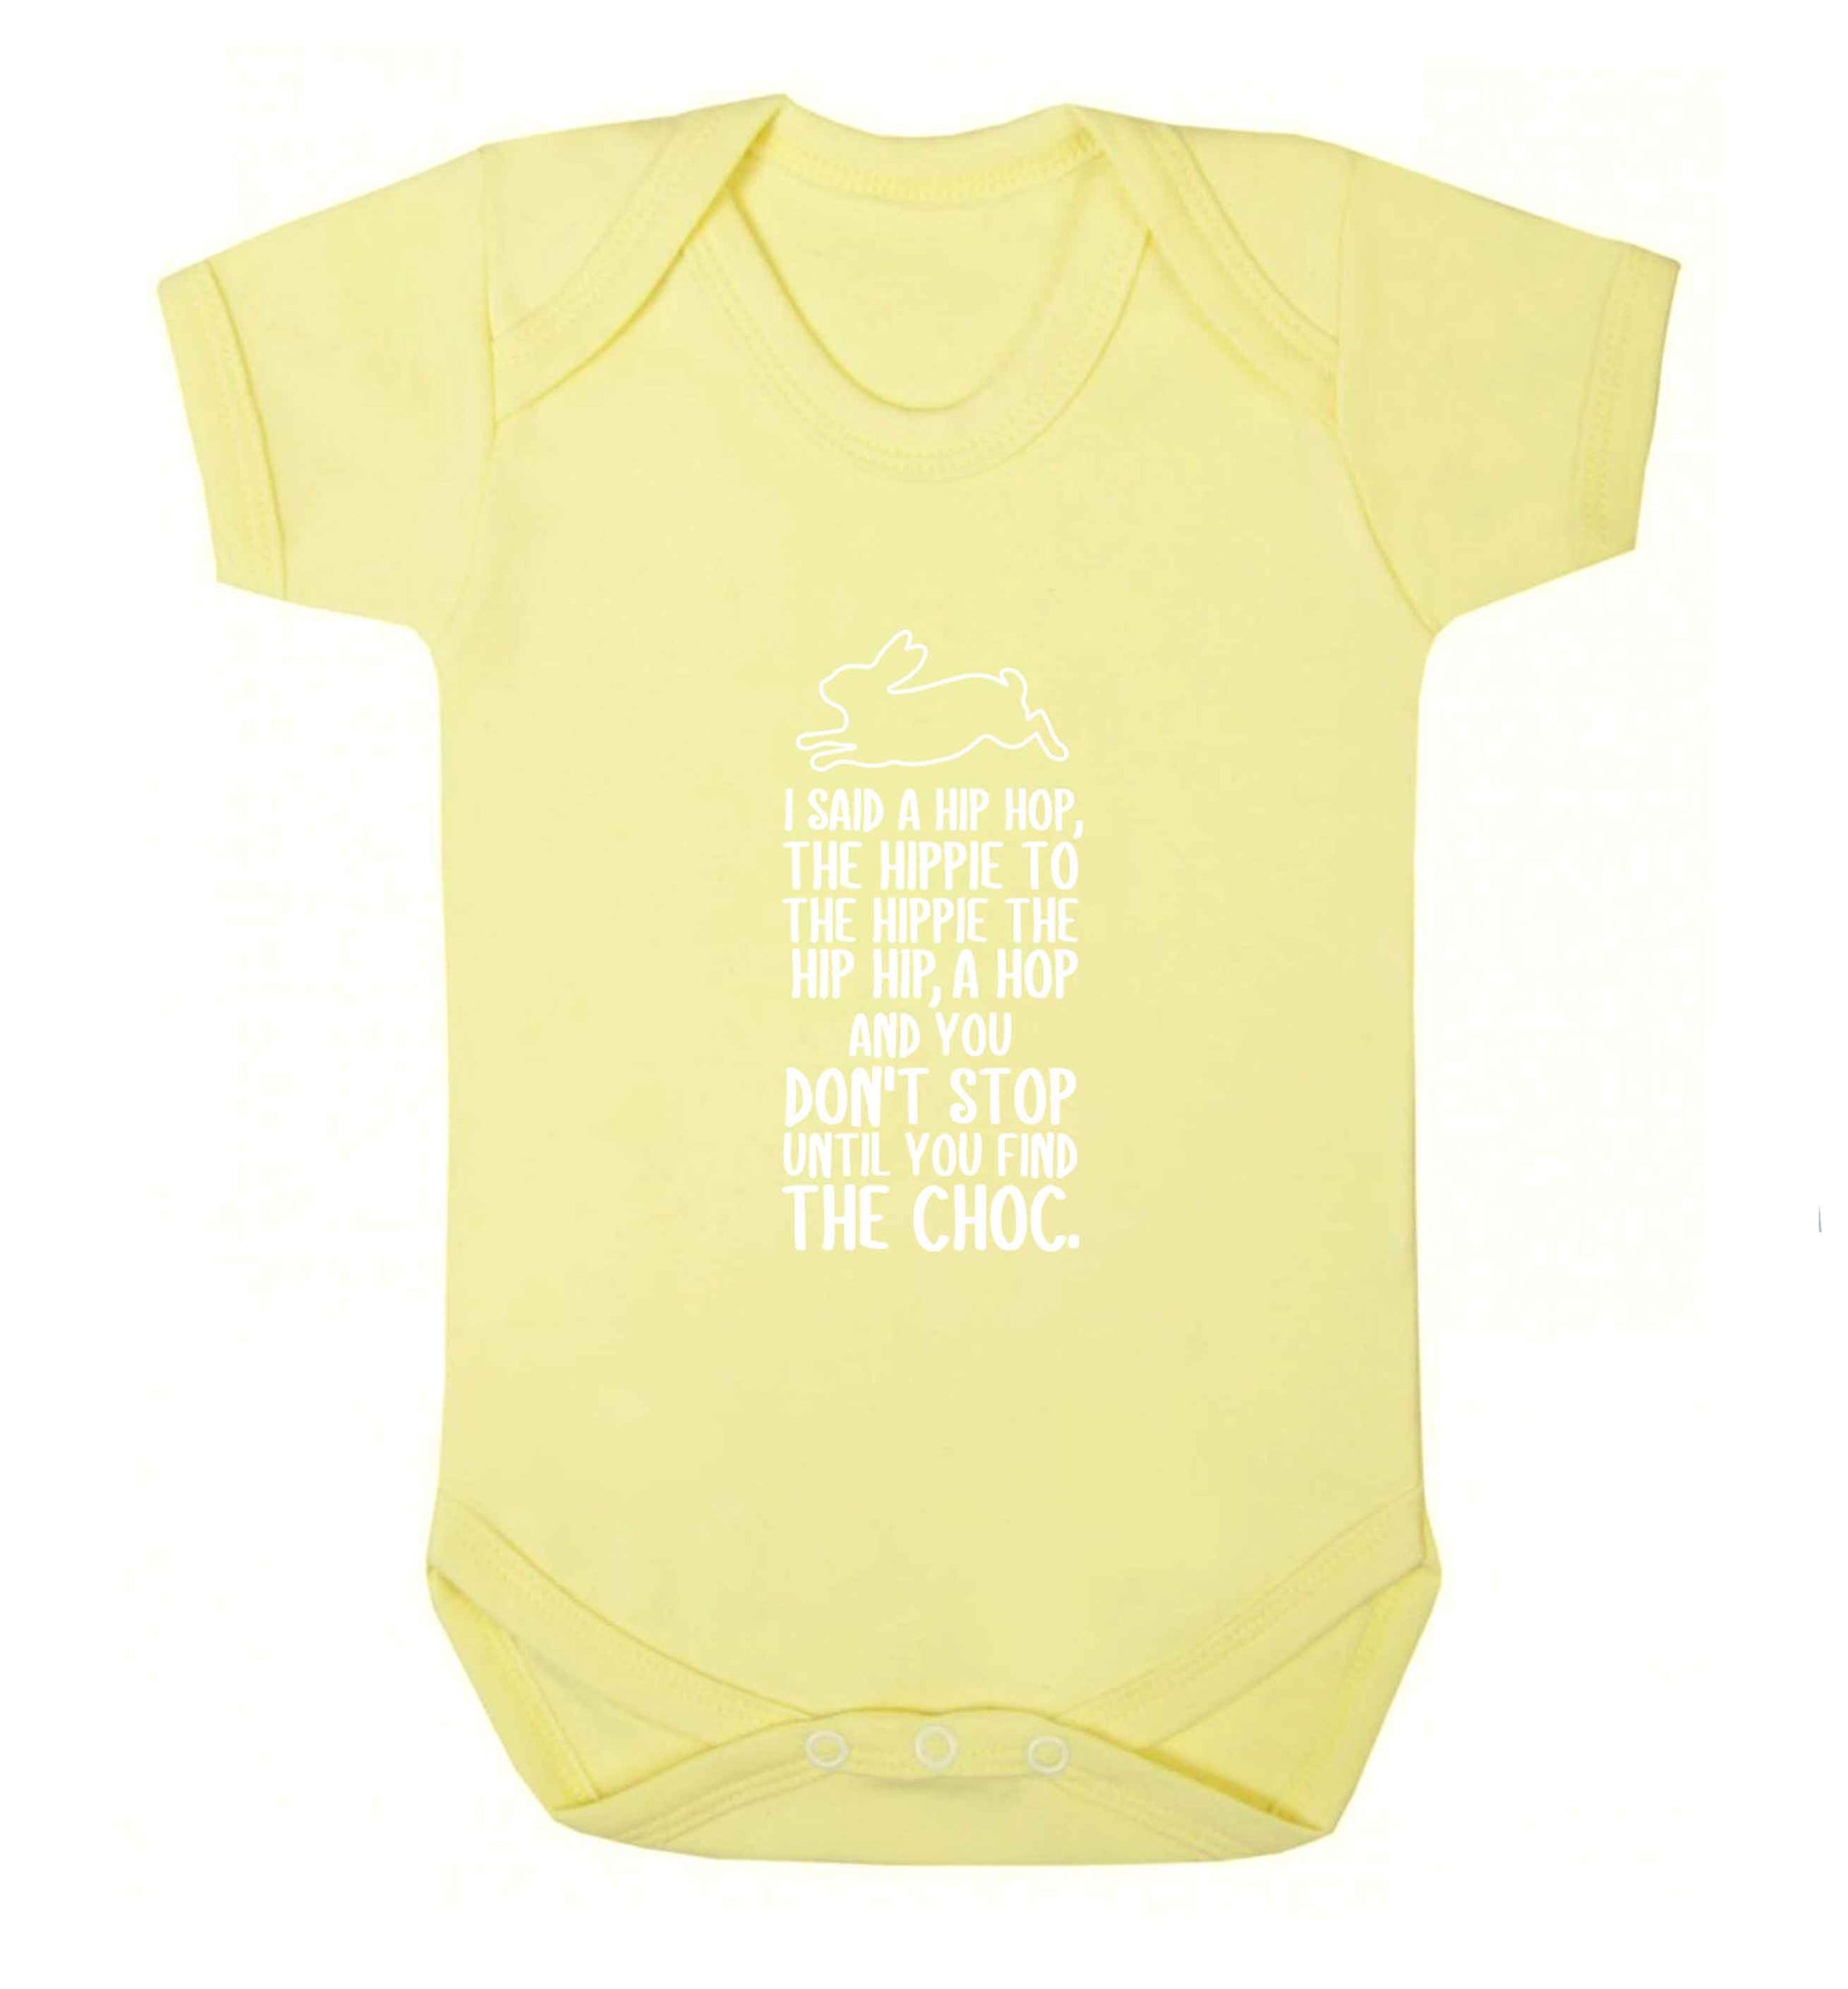 Don't stop until you find the choc baby vest pale yellow 18-24 months